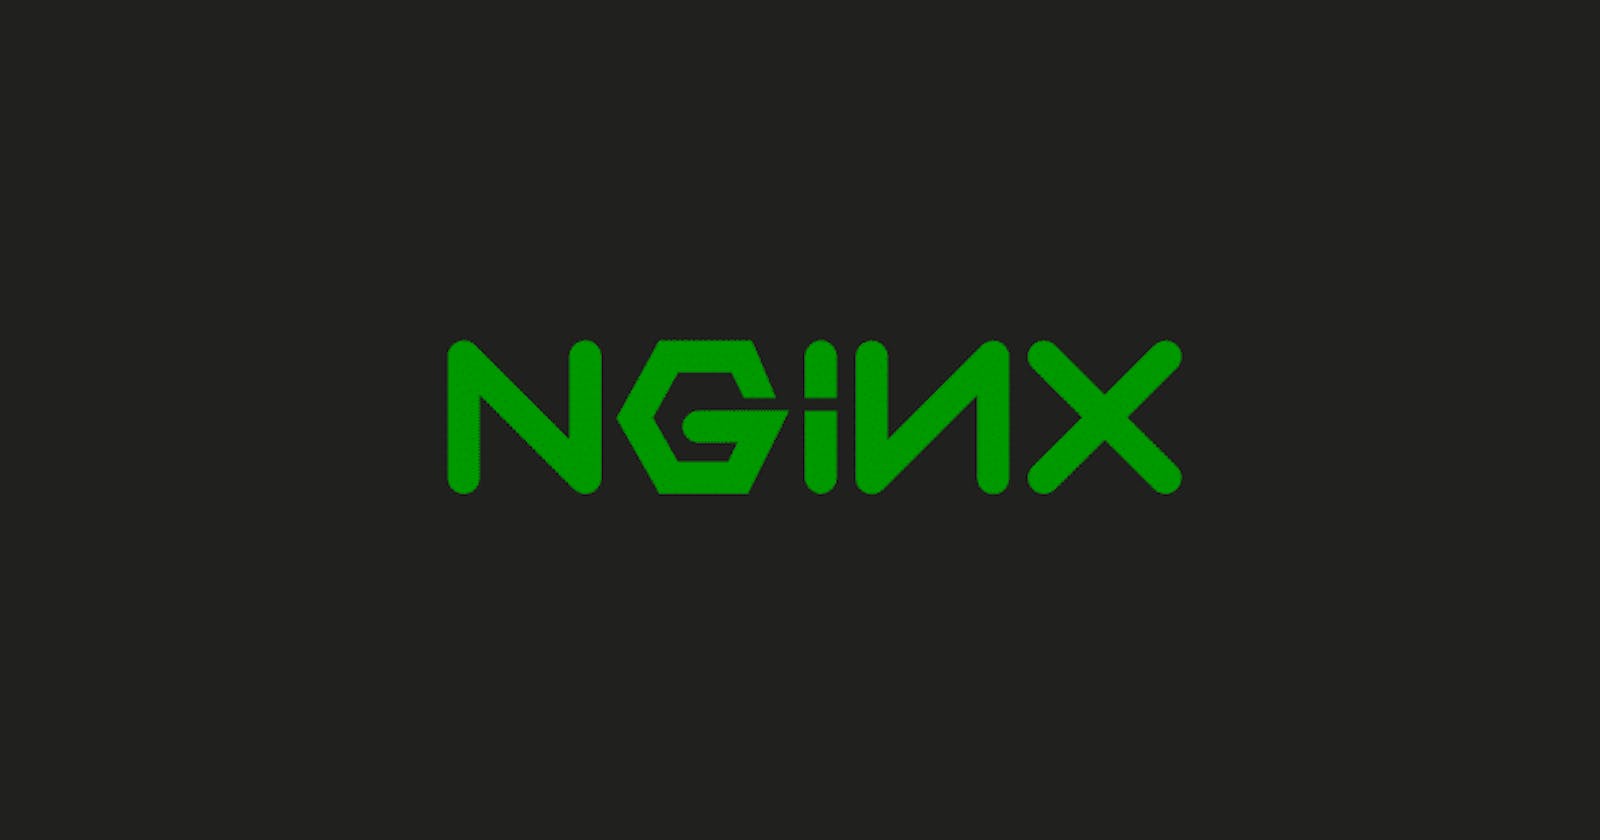 How to enable Gzip compression on nginx server